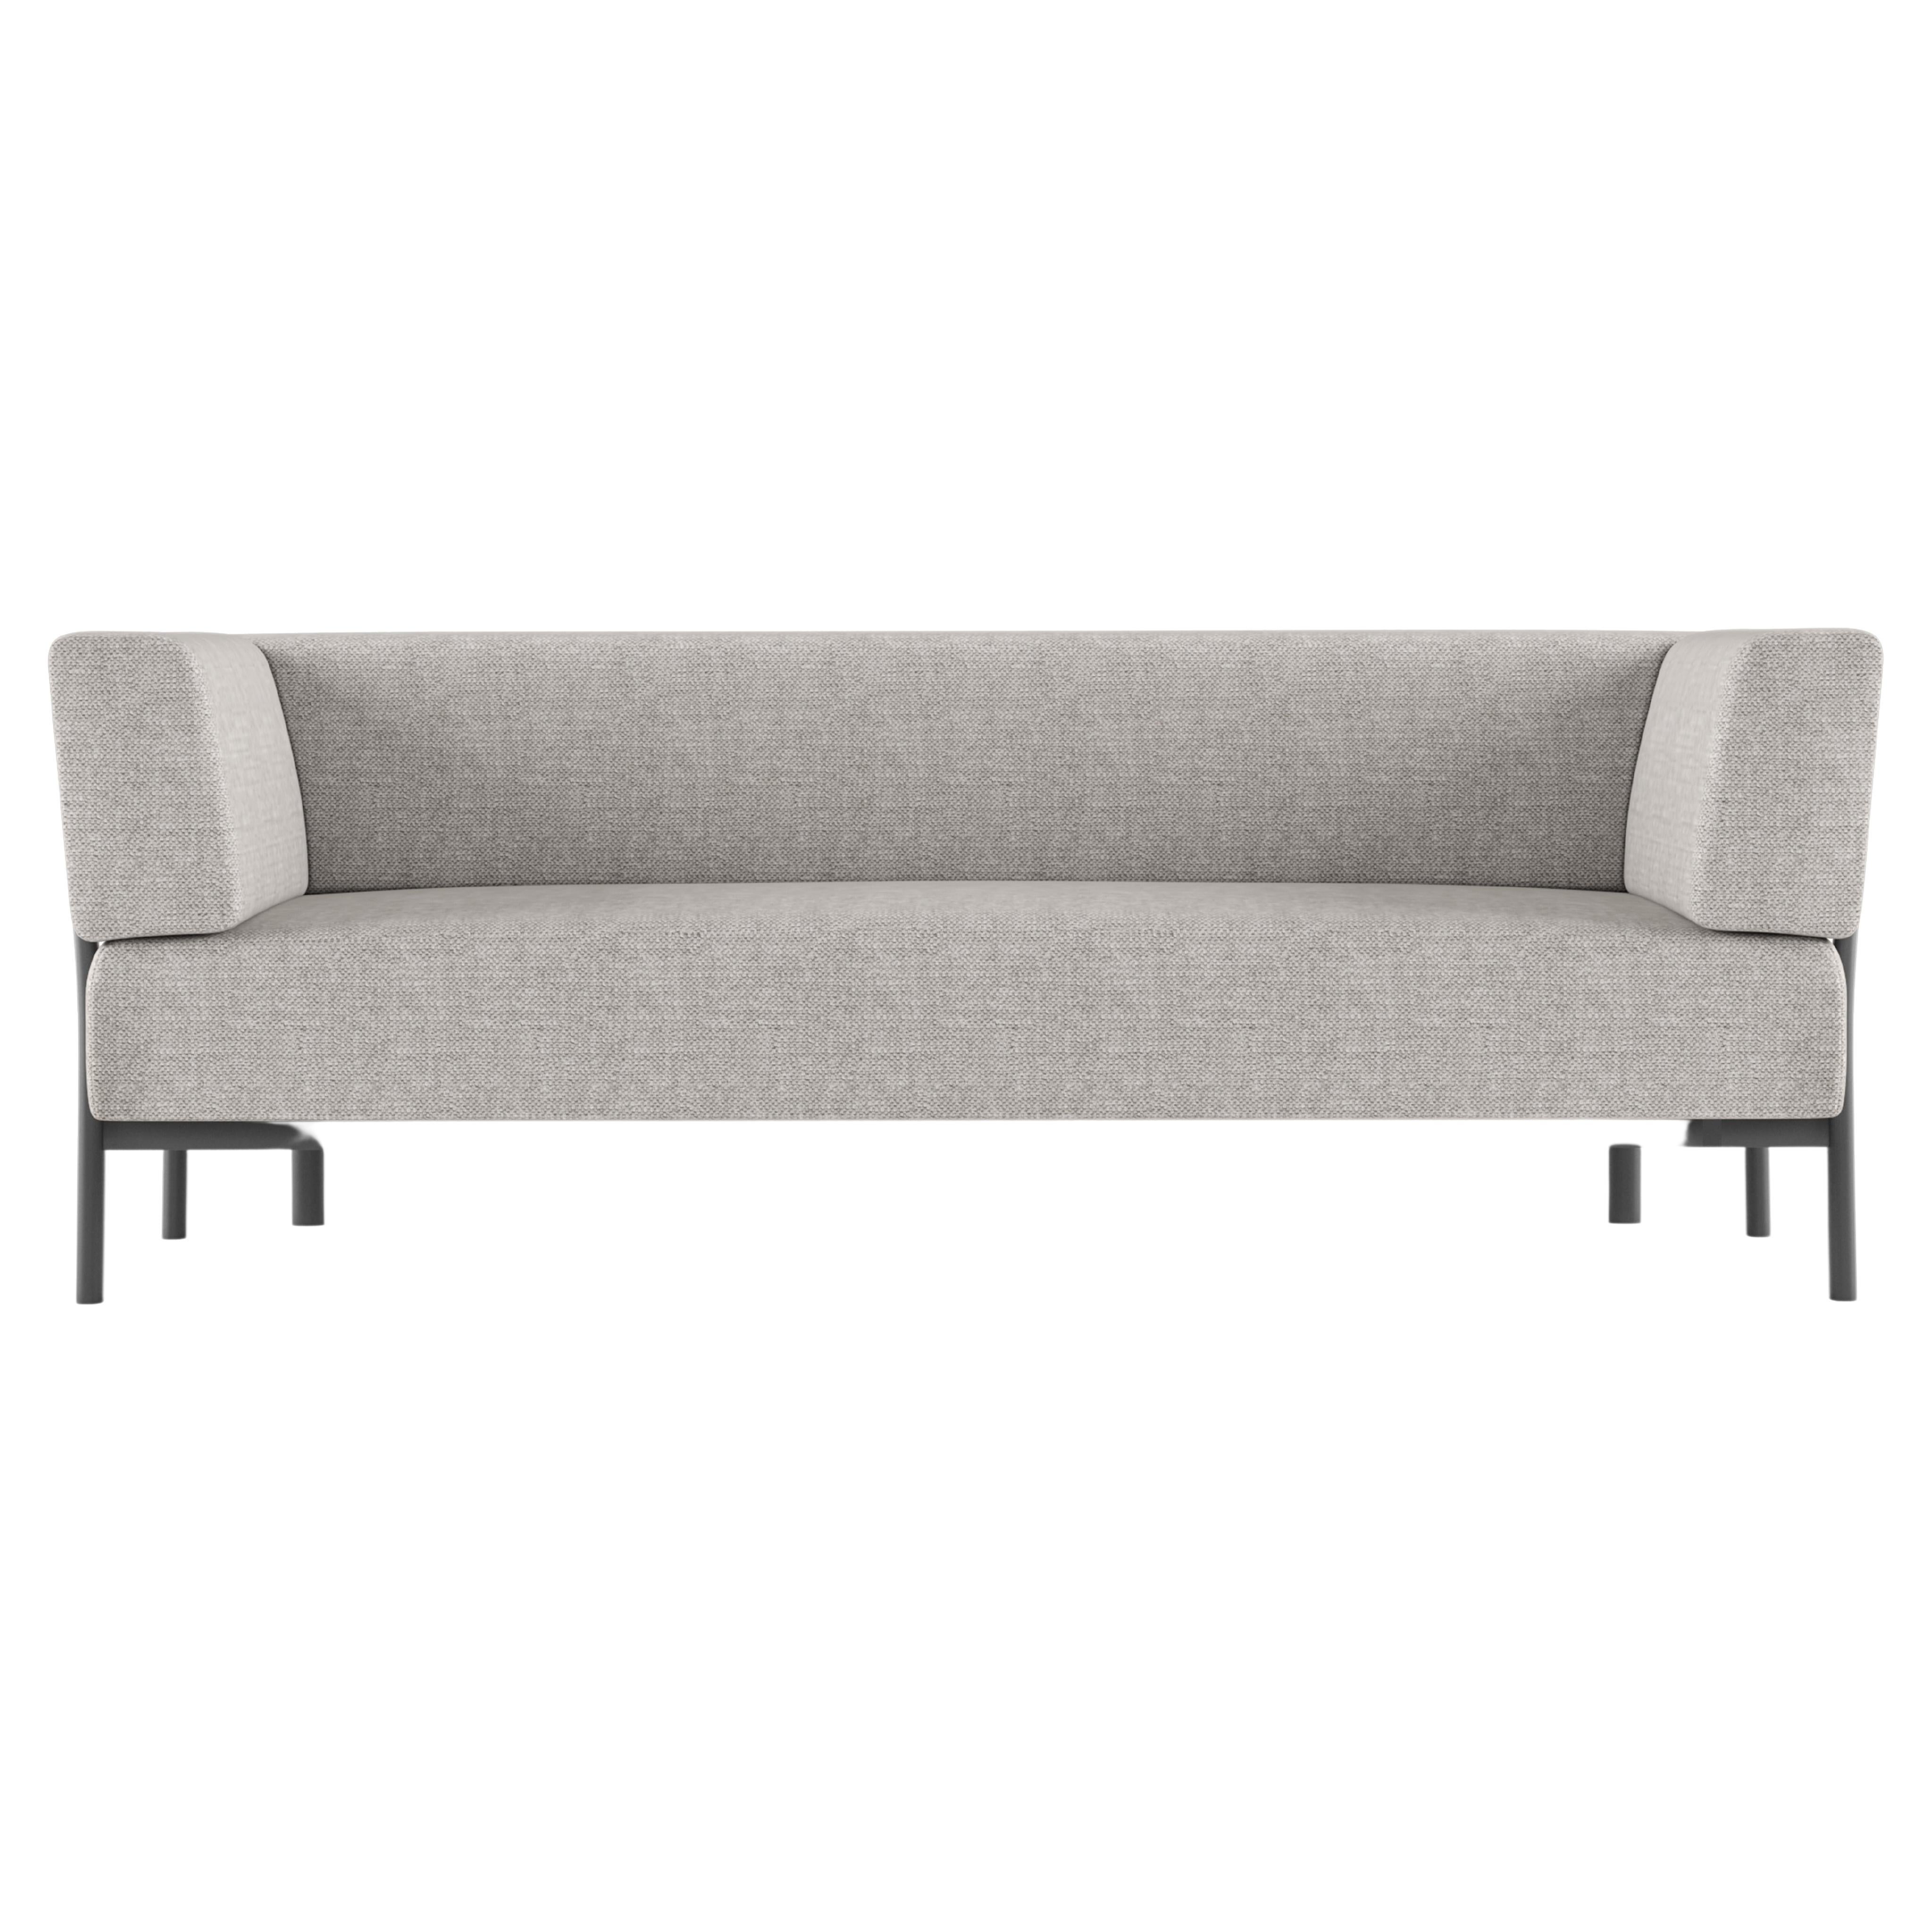 Alias T02_O Ten 2 Seater Outdoor Sofa in Grey and Black Lacquered Aluminum Frame